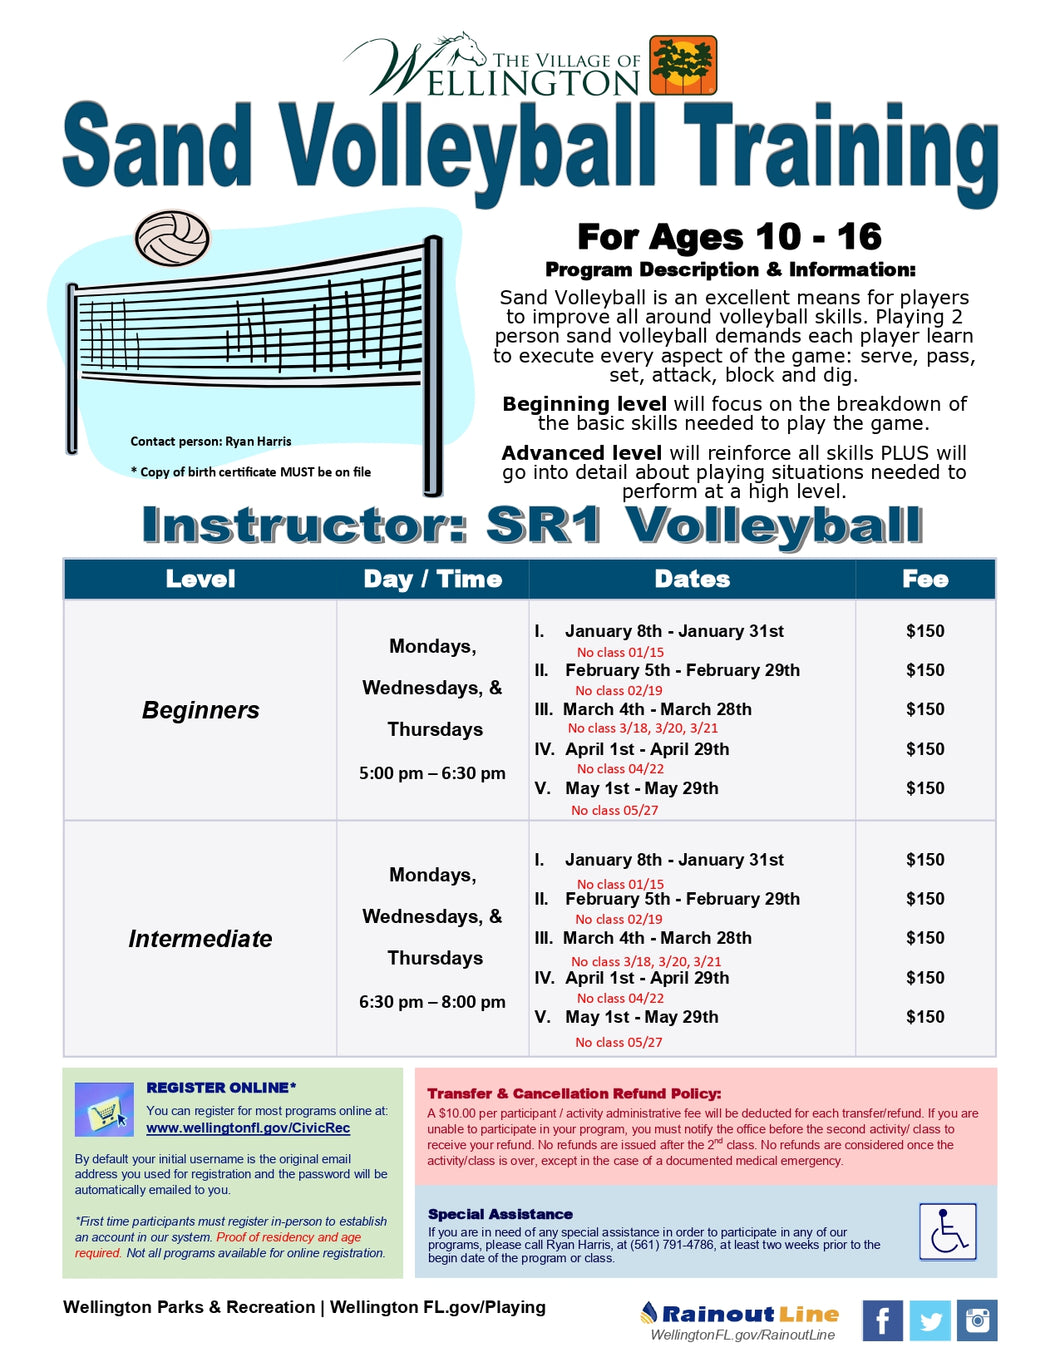 Group Lessons - SR1 Volleyball